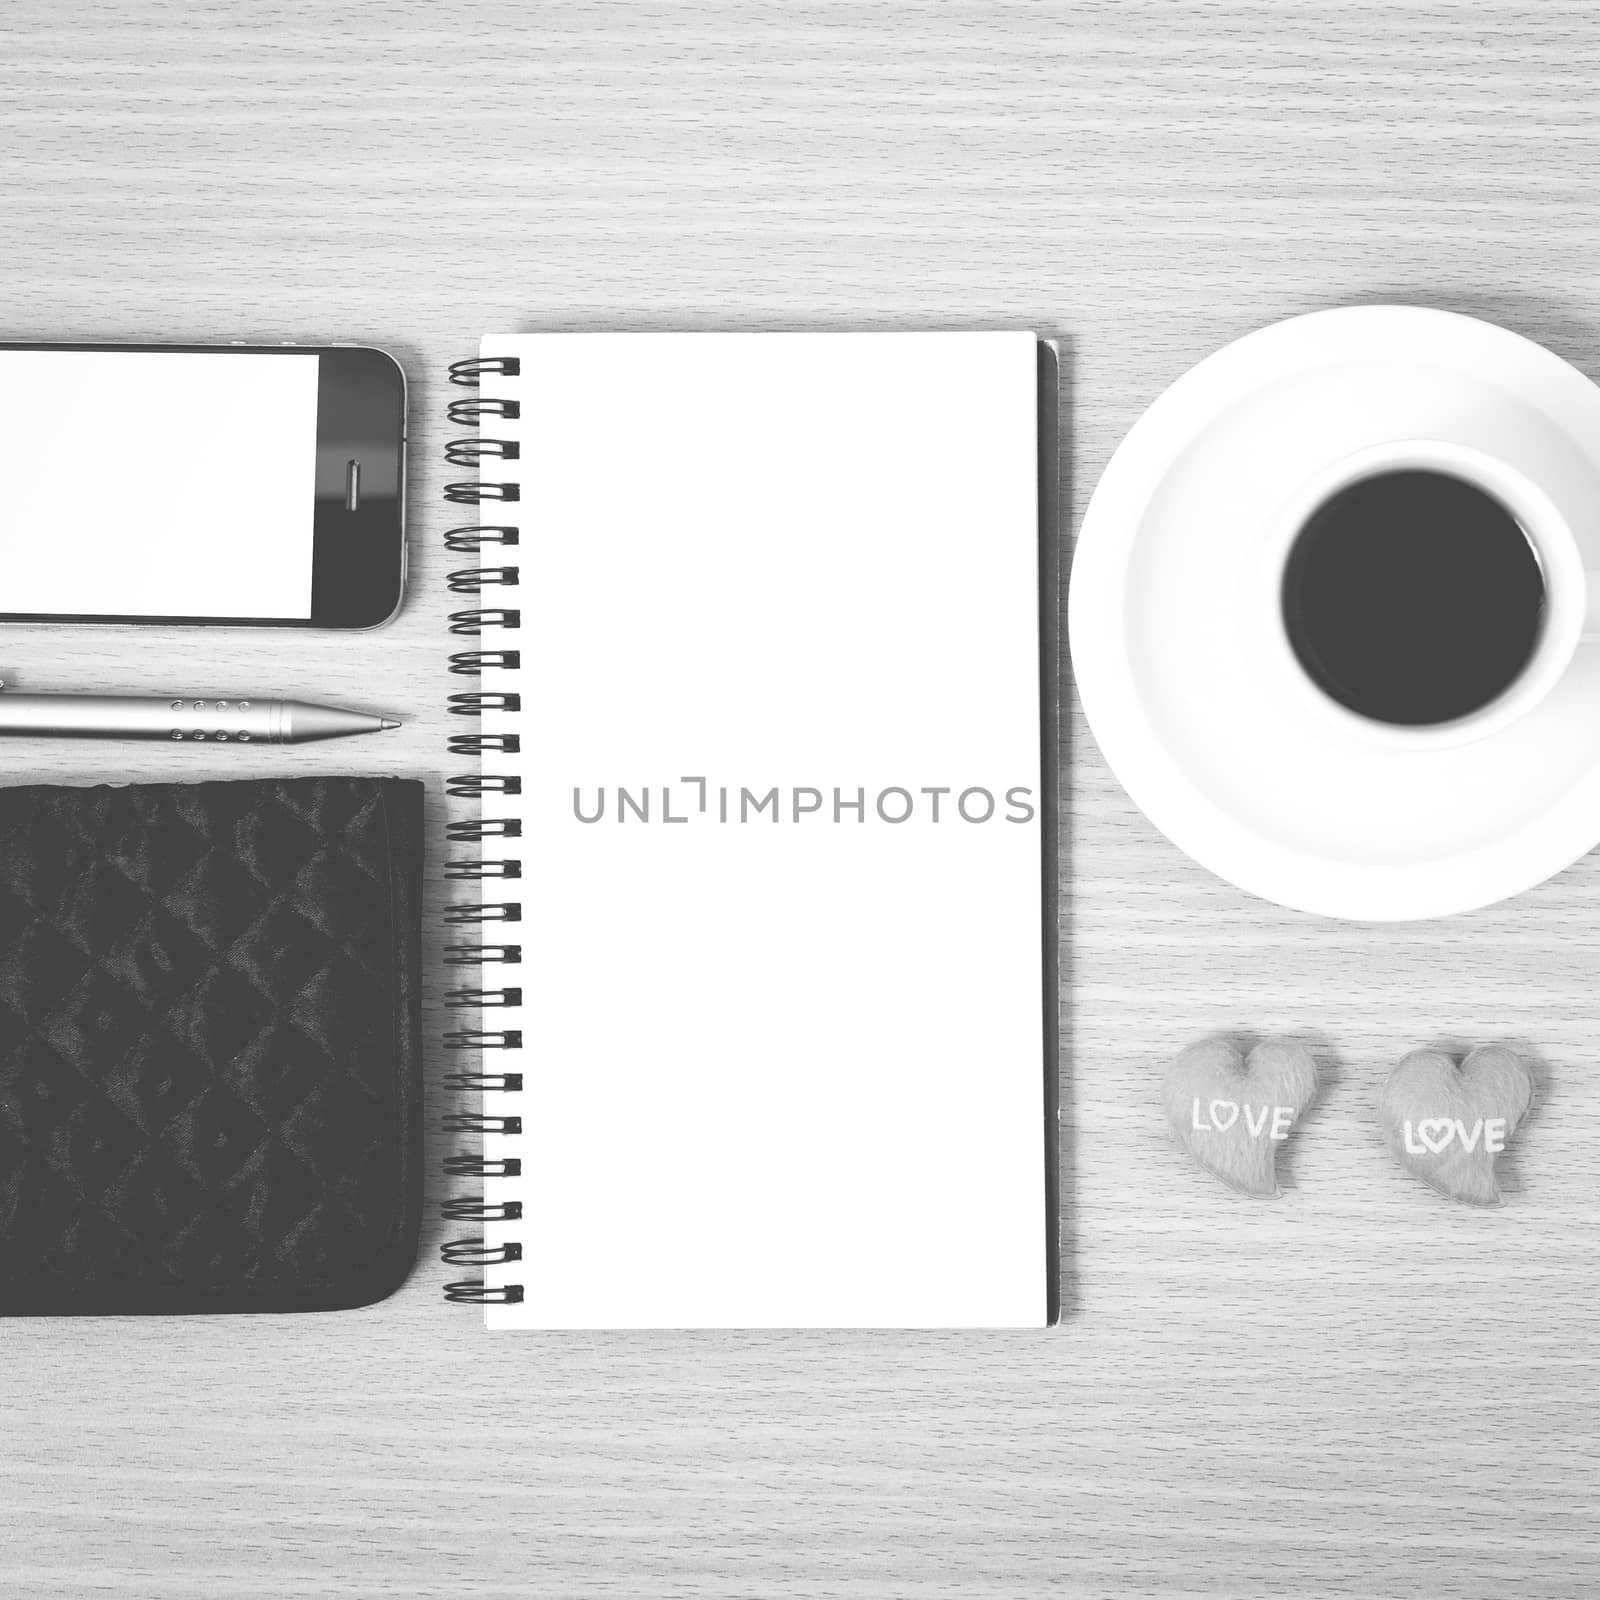 working table : coffee with phone,notepad,wallet and red heart b by ammza12